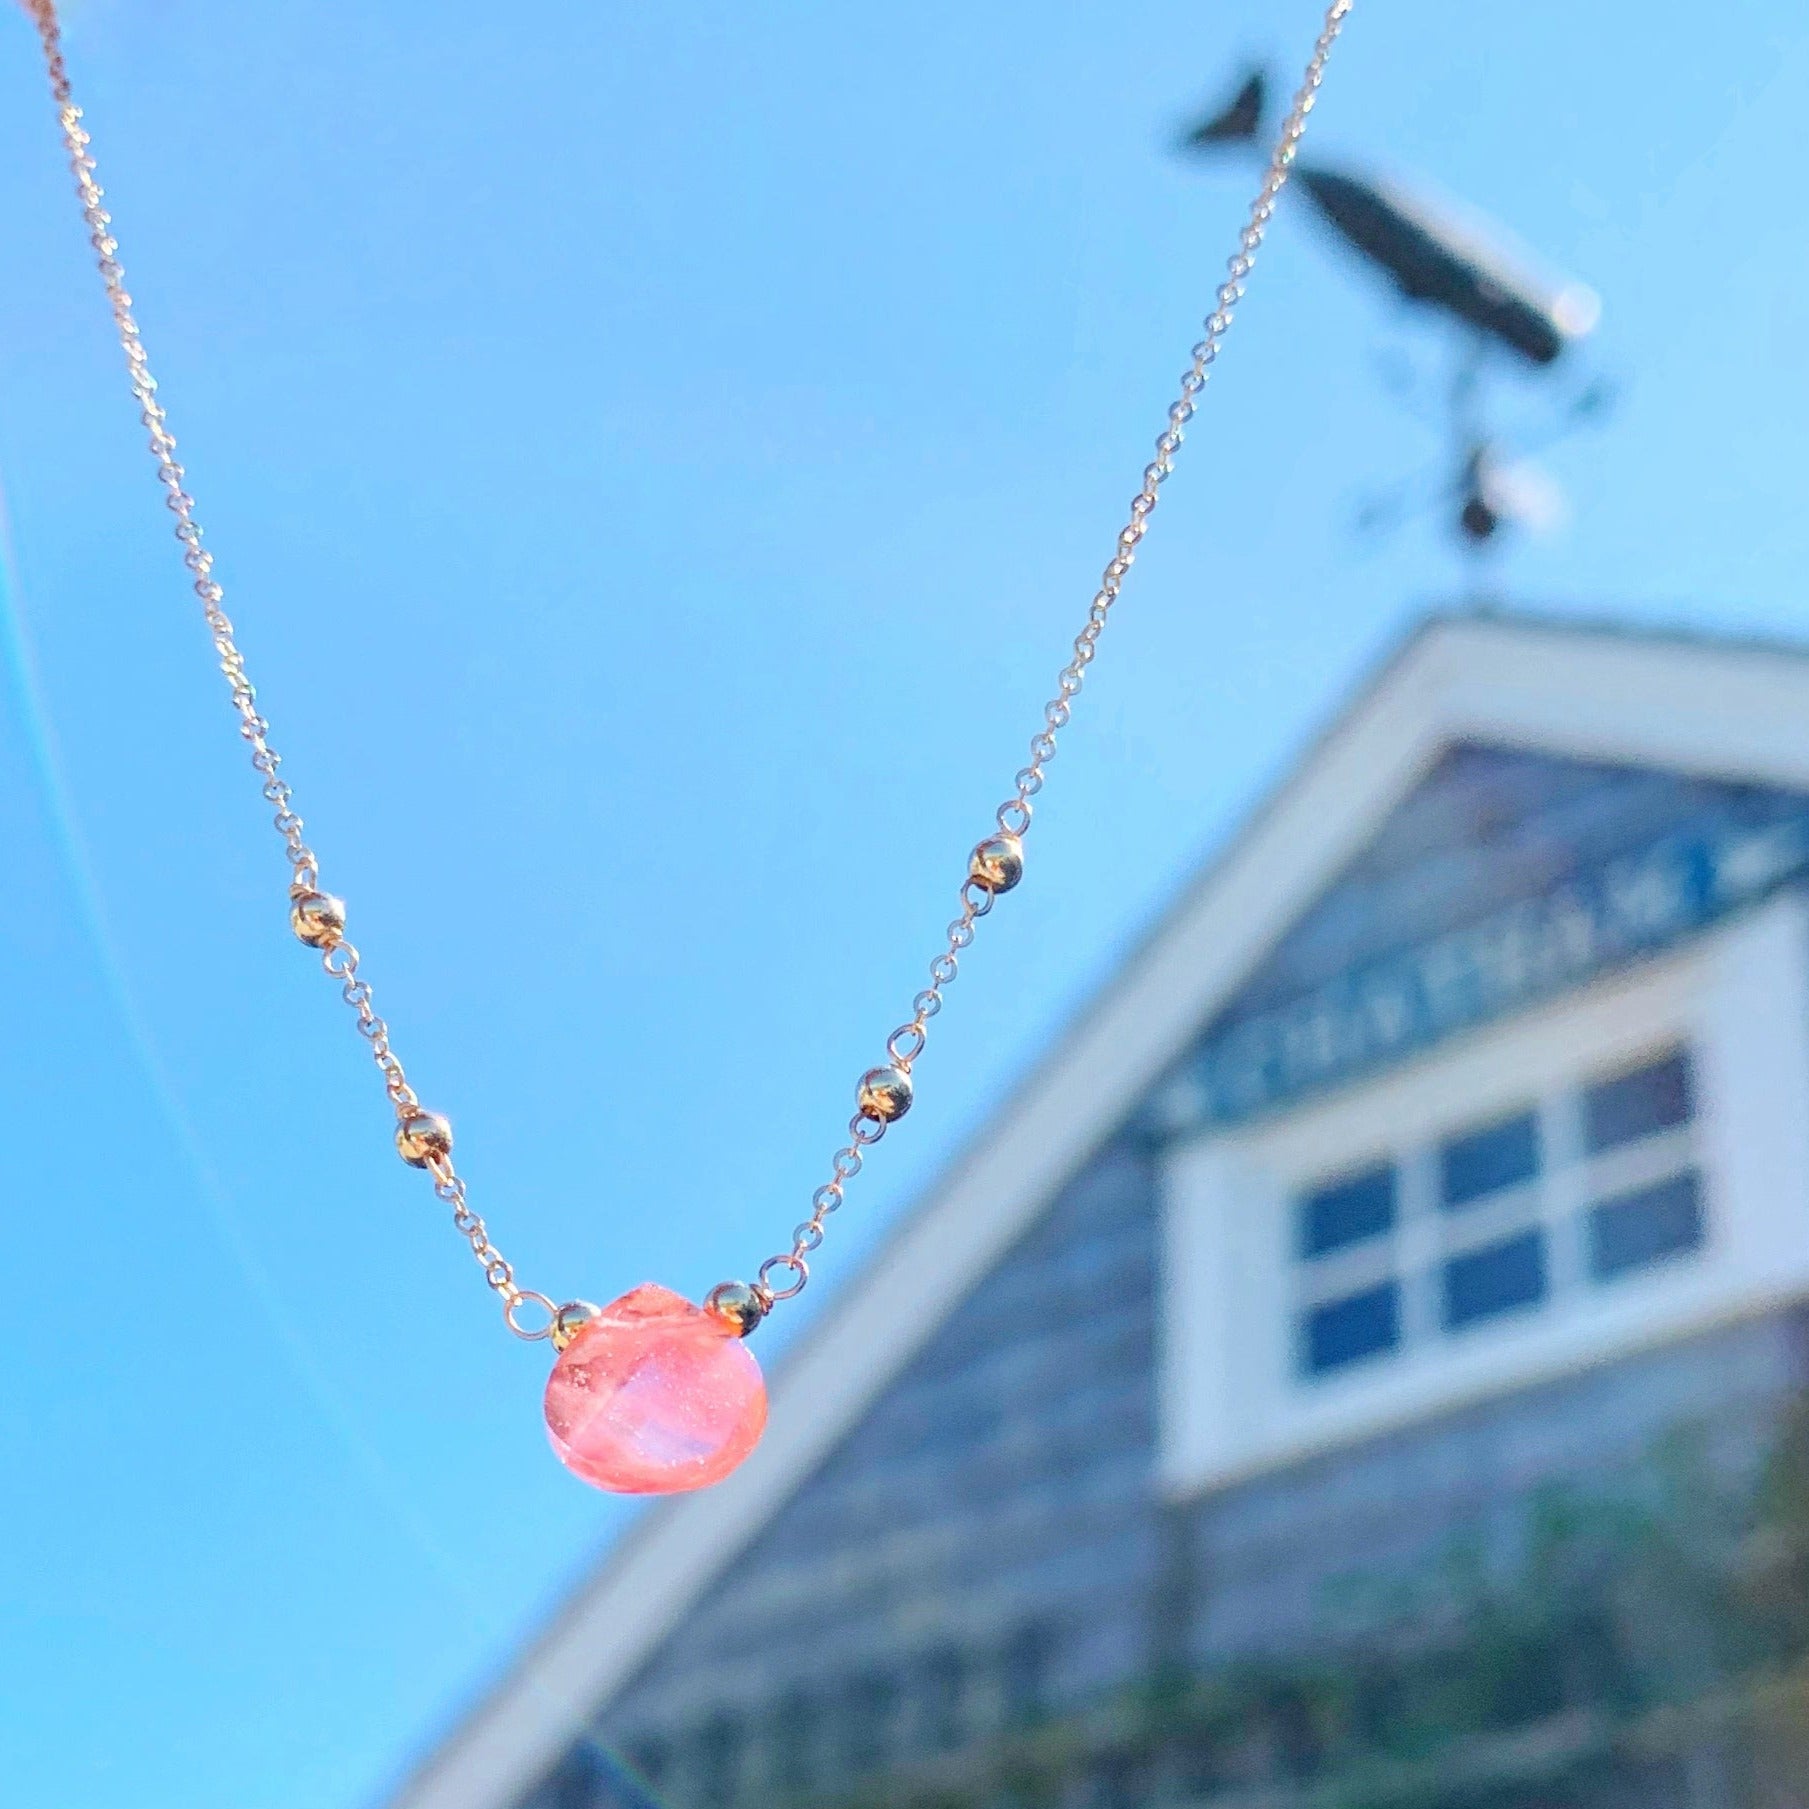 Chatham Necklace by Mermaids and Madeleines features a cherry quartz briolette and 14k gold filled beads, findings and chain. This one is photographed in the air with a blurred shingled beach cottage in the background